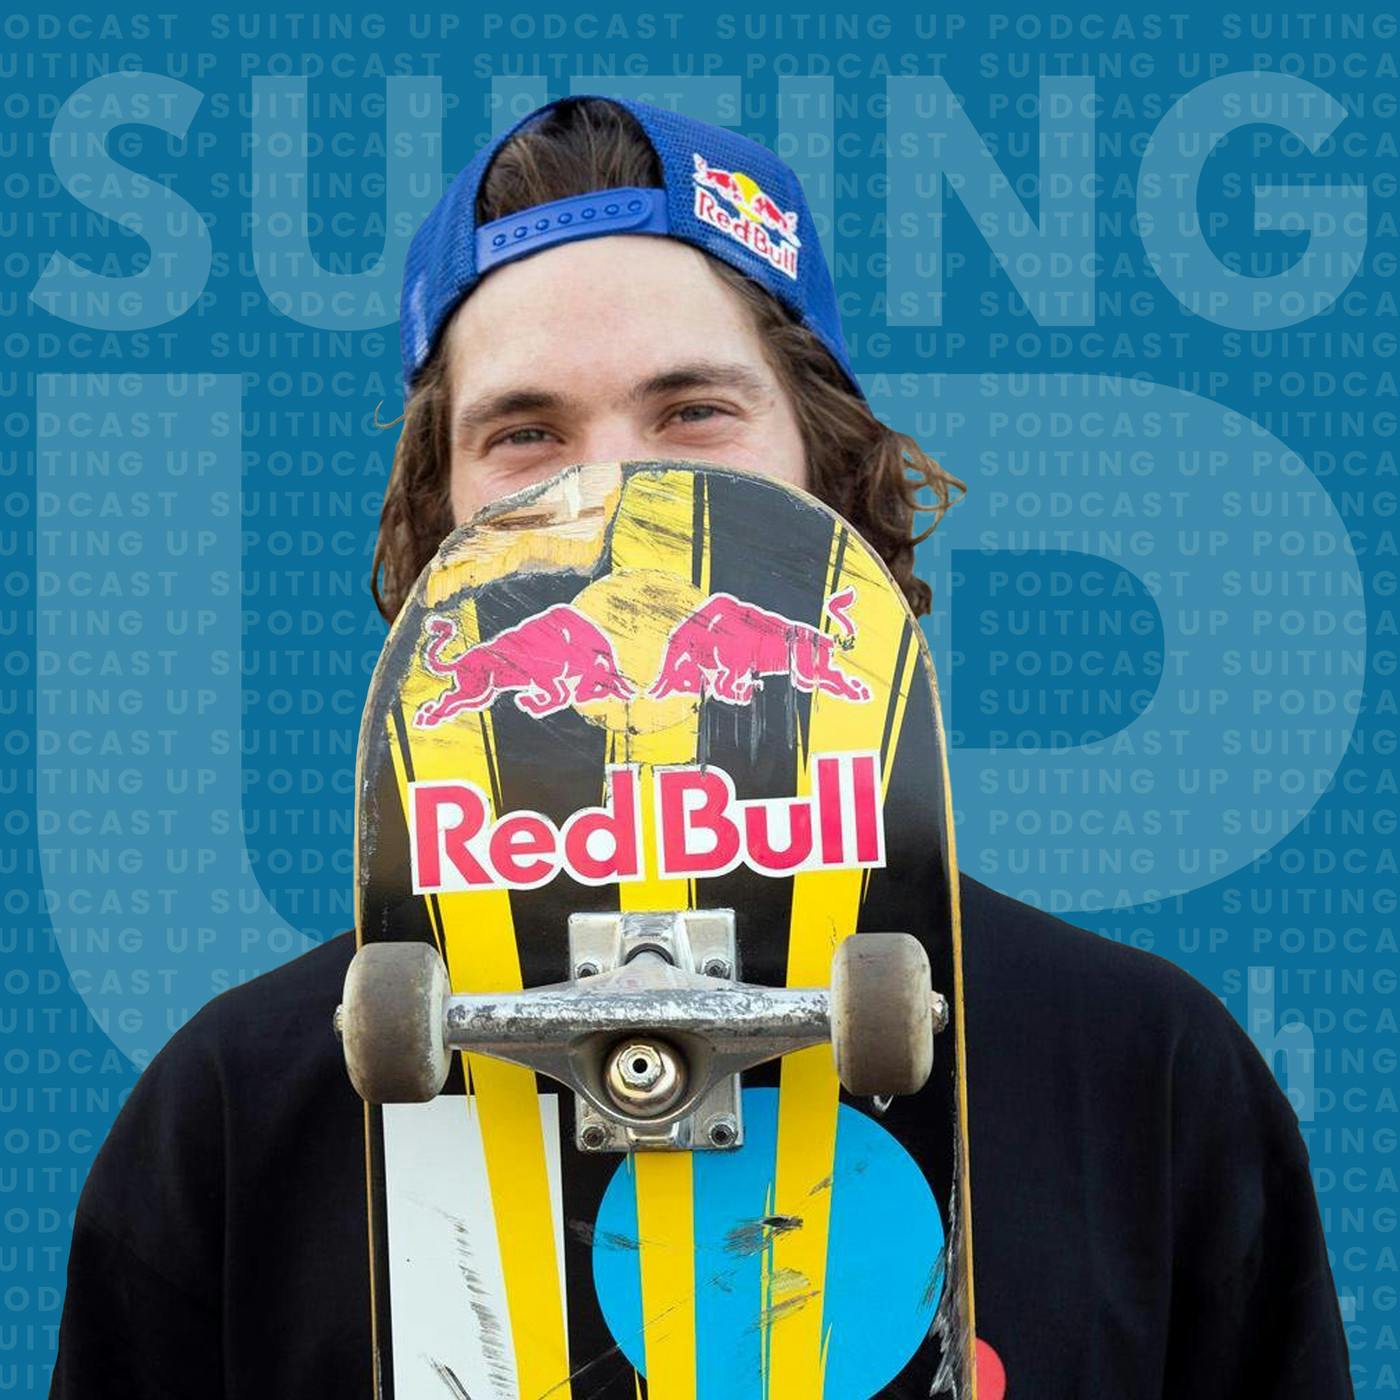 Torey Pudwill: Pro Skateboarder and Entrepreneur